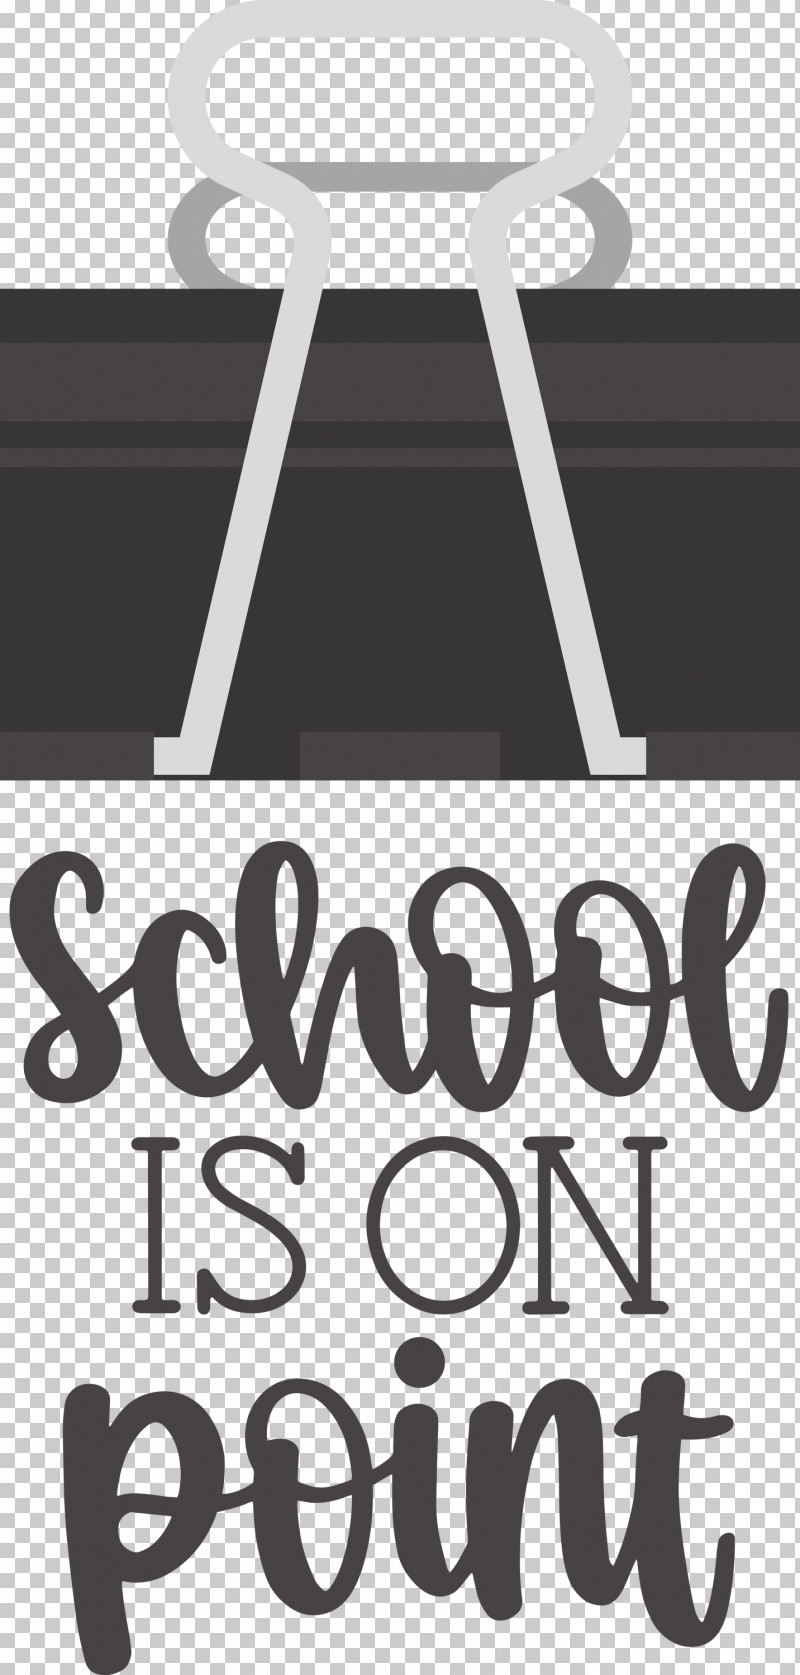 School Is On Point School Education PNG, Clipart, Black, Black And White, Education, Logo, Meter Free PNG Download